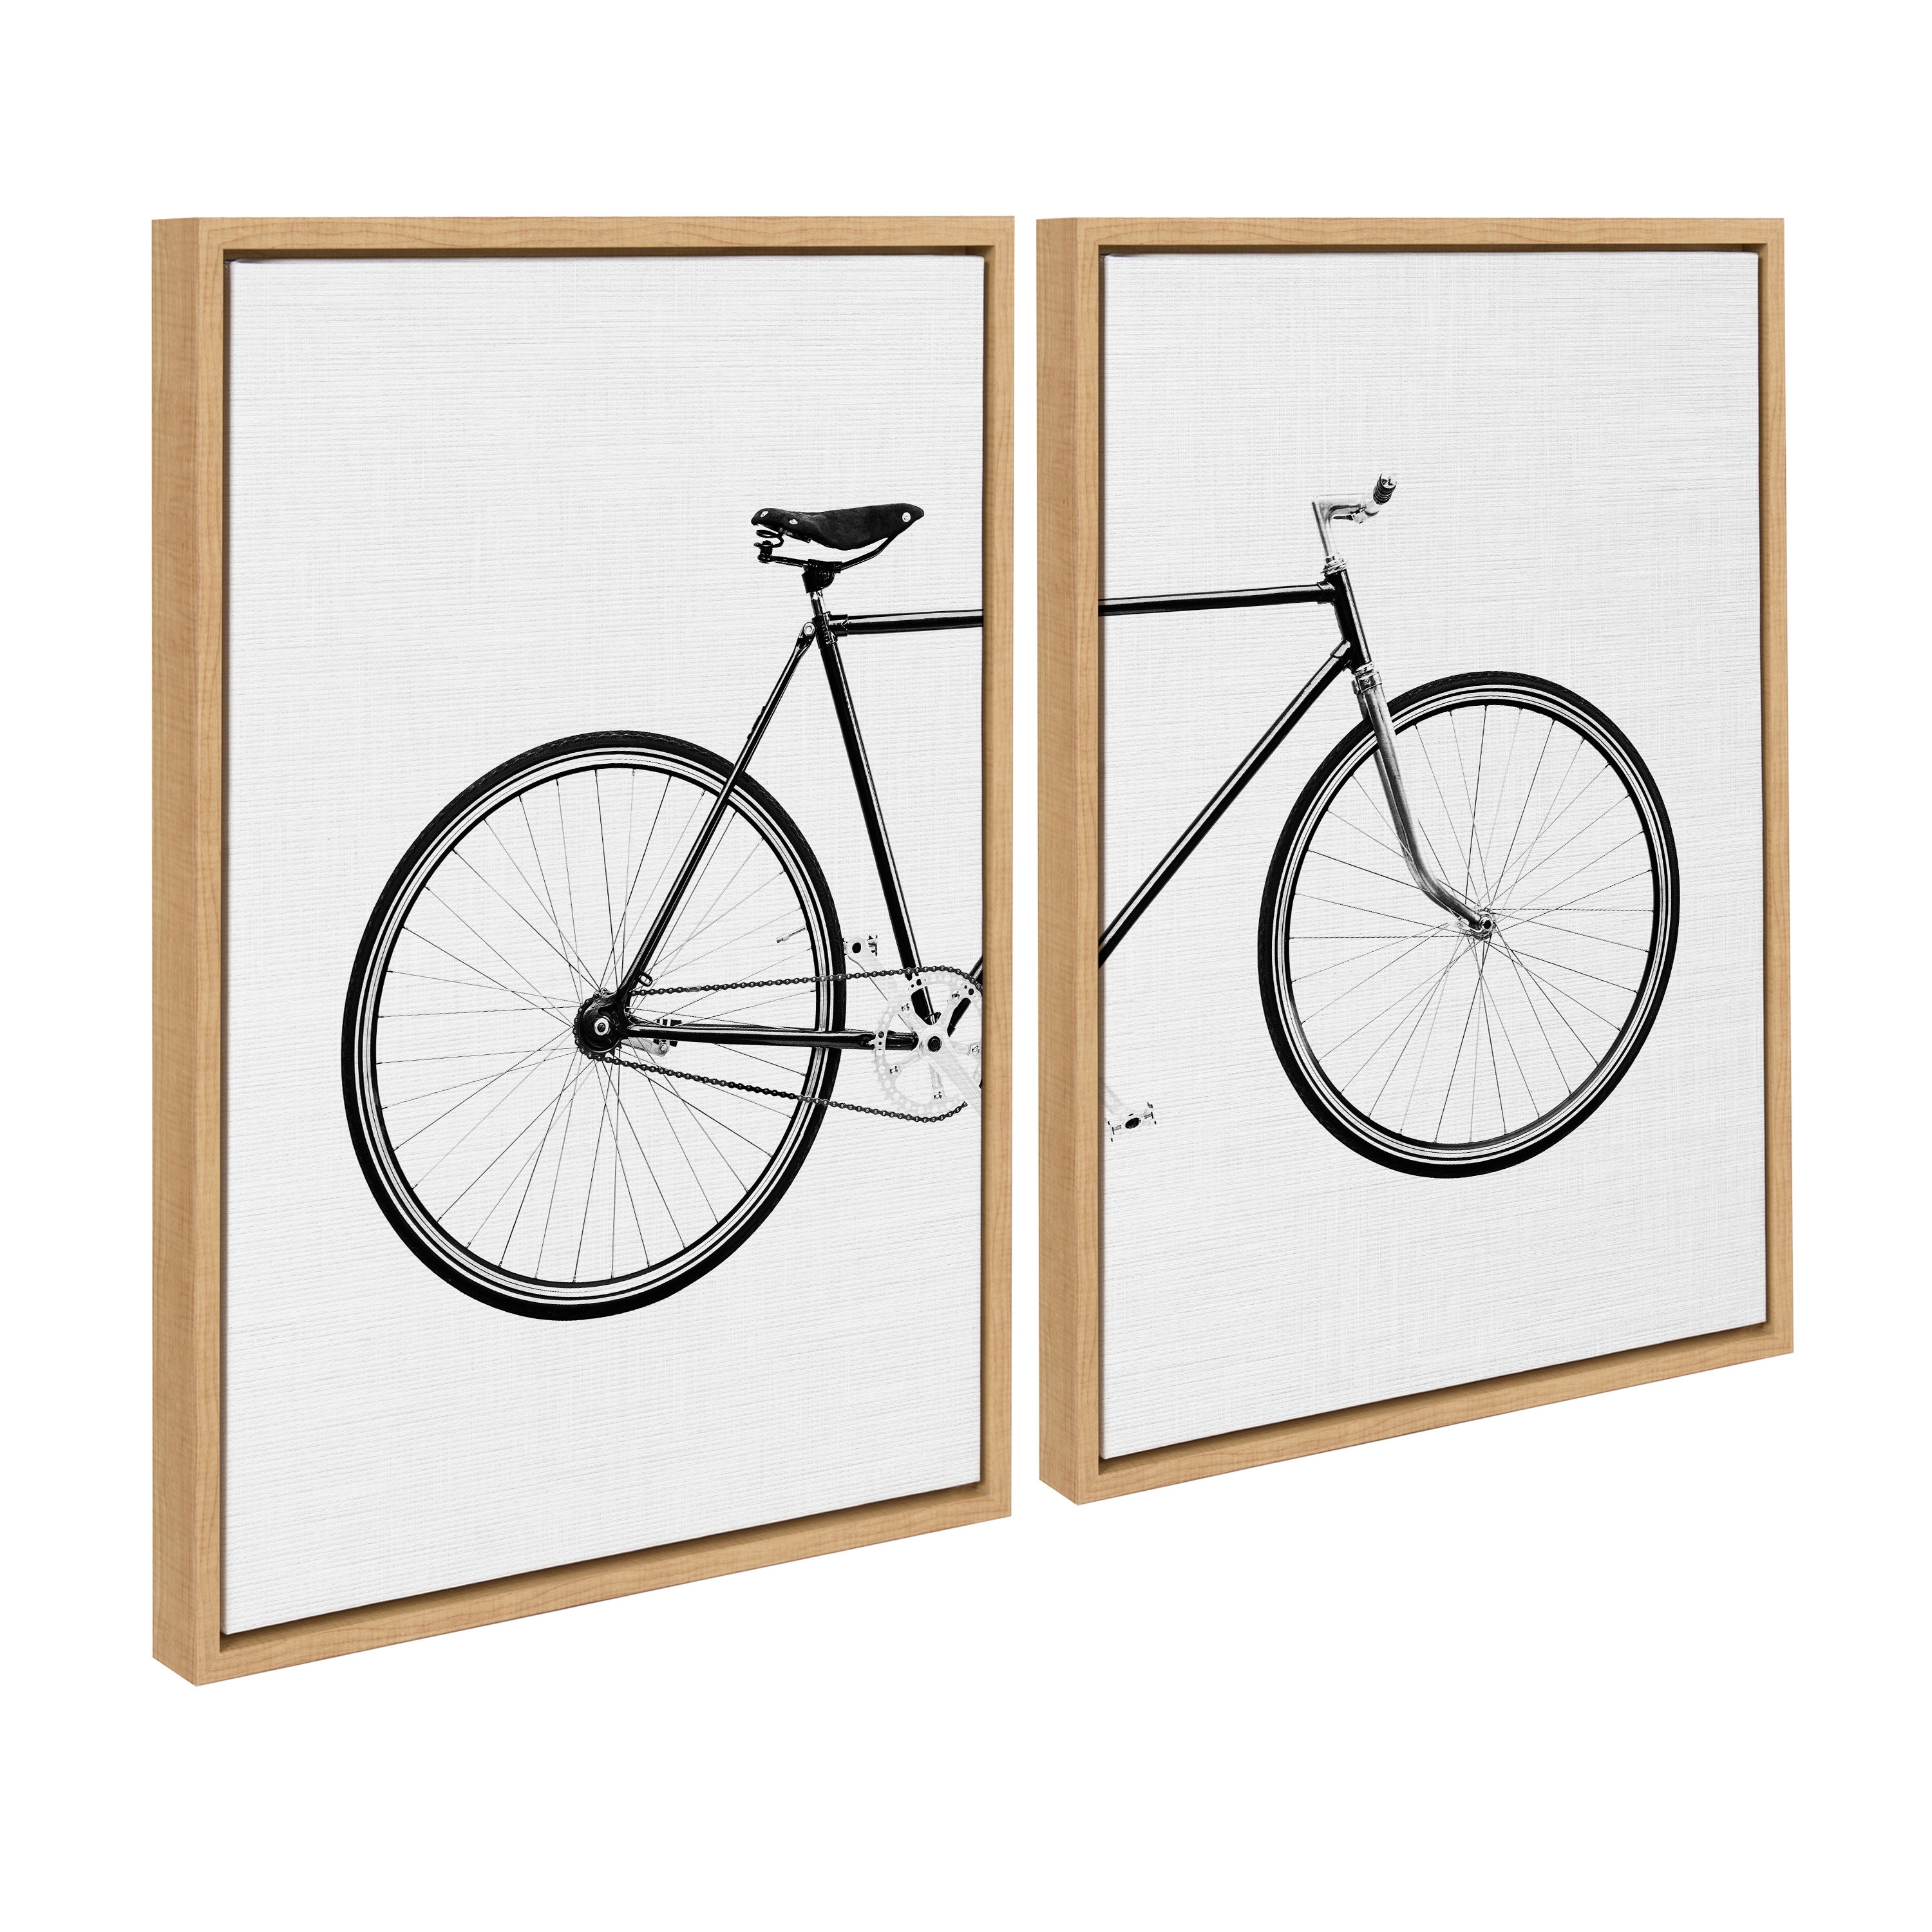 Kate and Laurel Sylvie Bicycle Canvas by Simon Te of Tai Prints On Sale  Bed Bath  Beyond 30962735